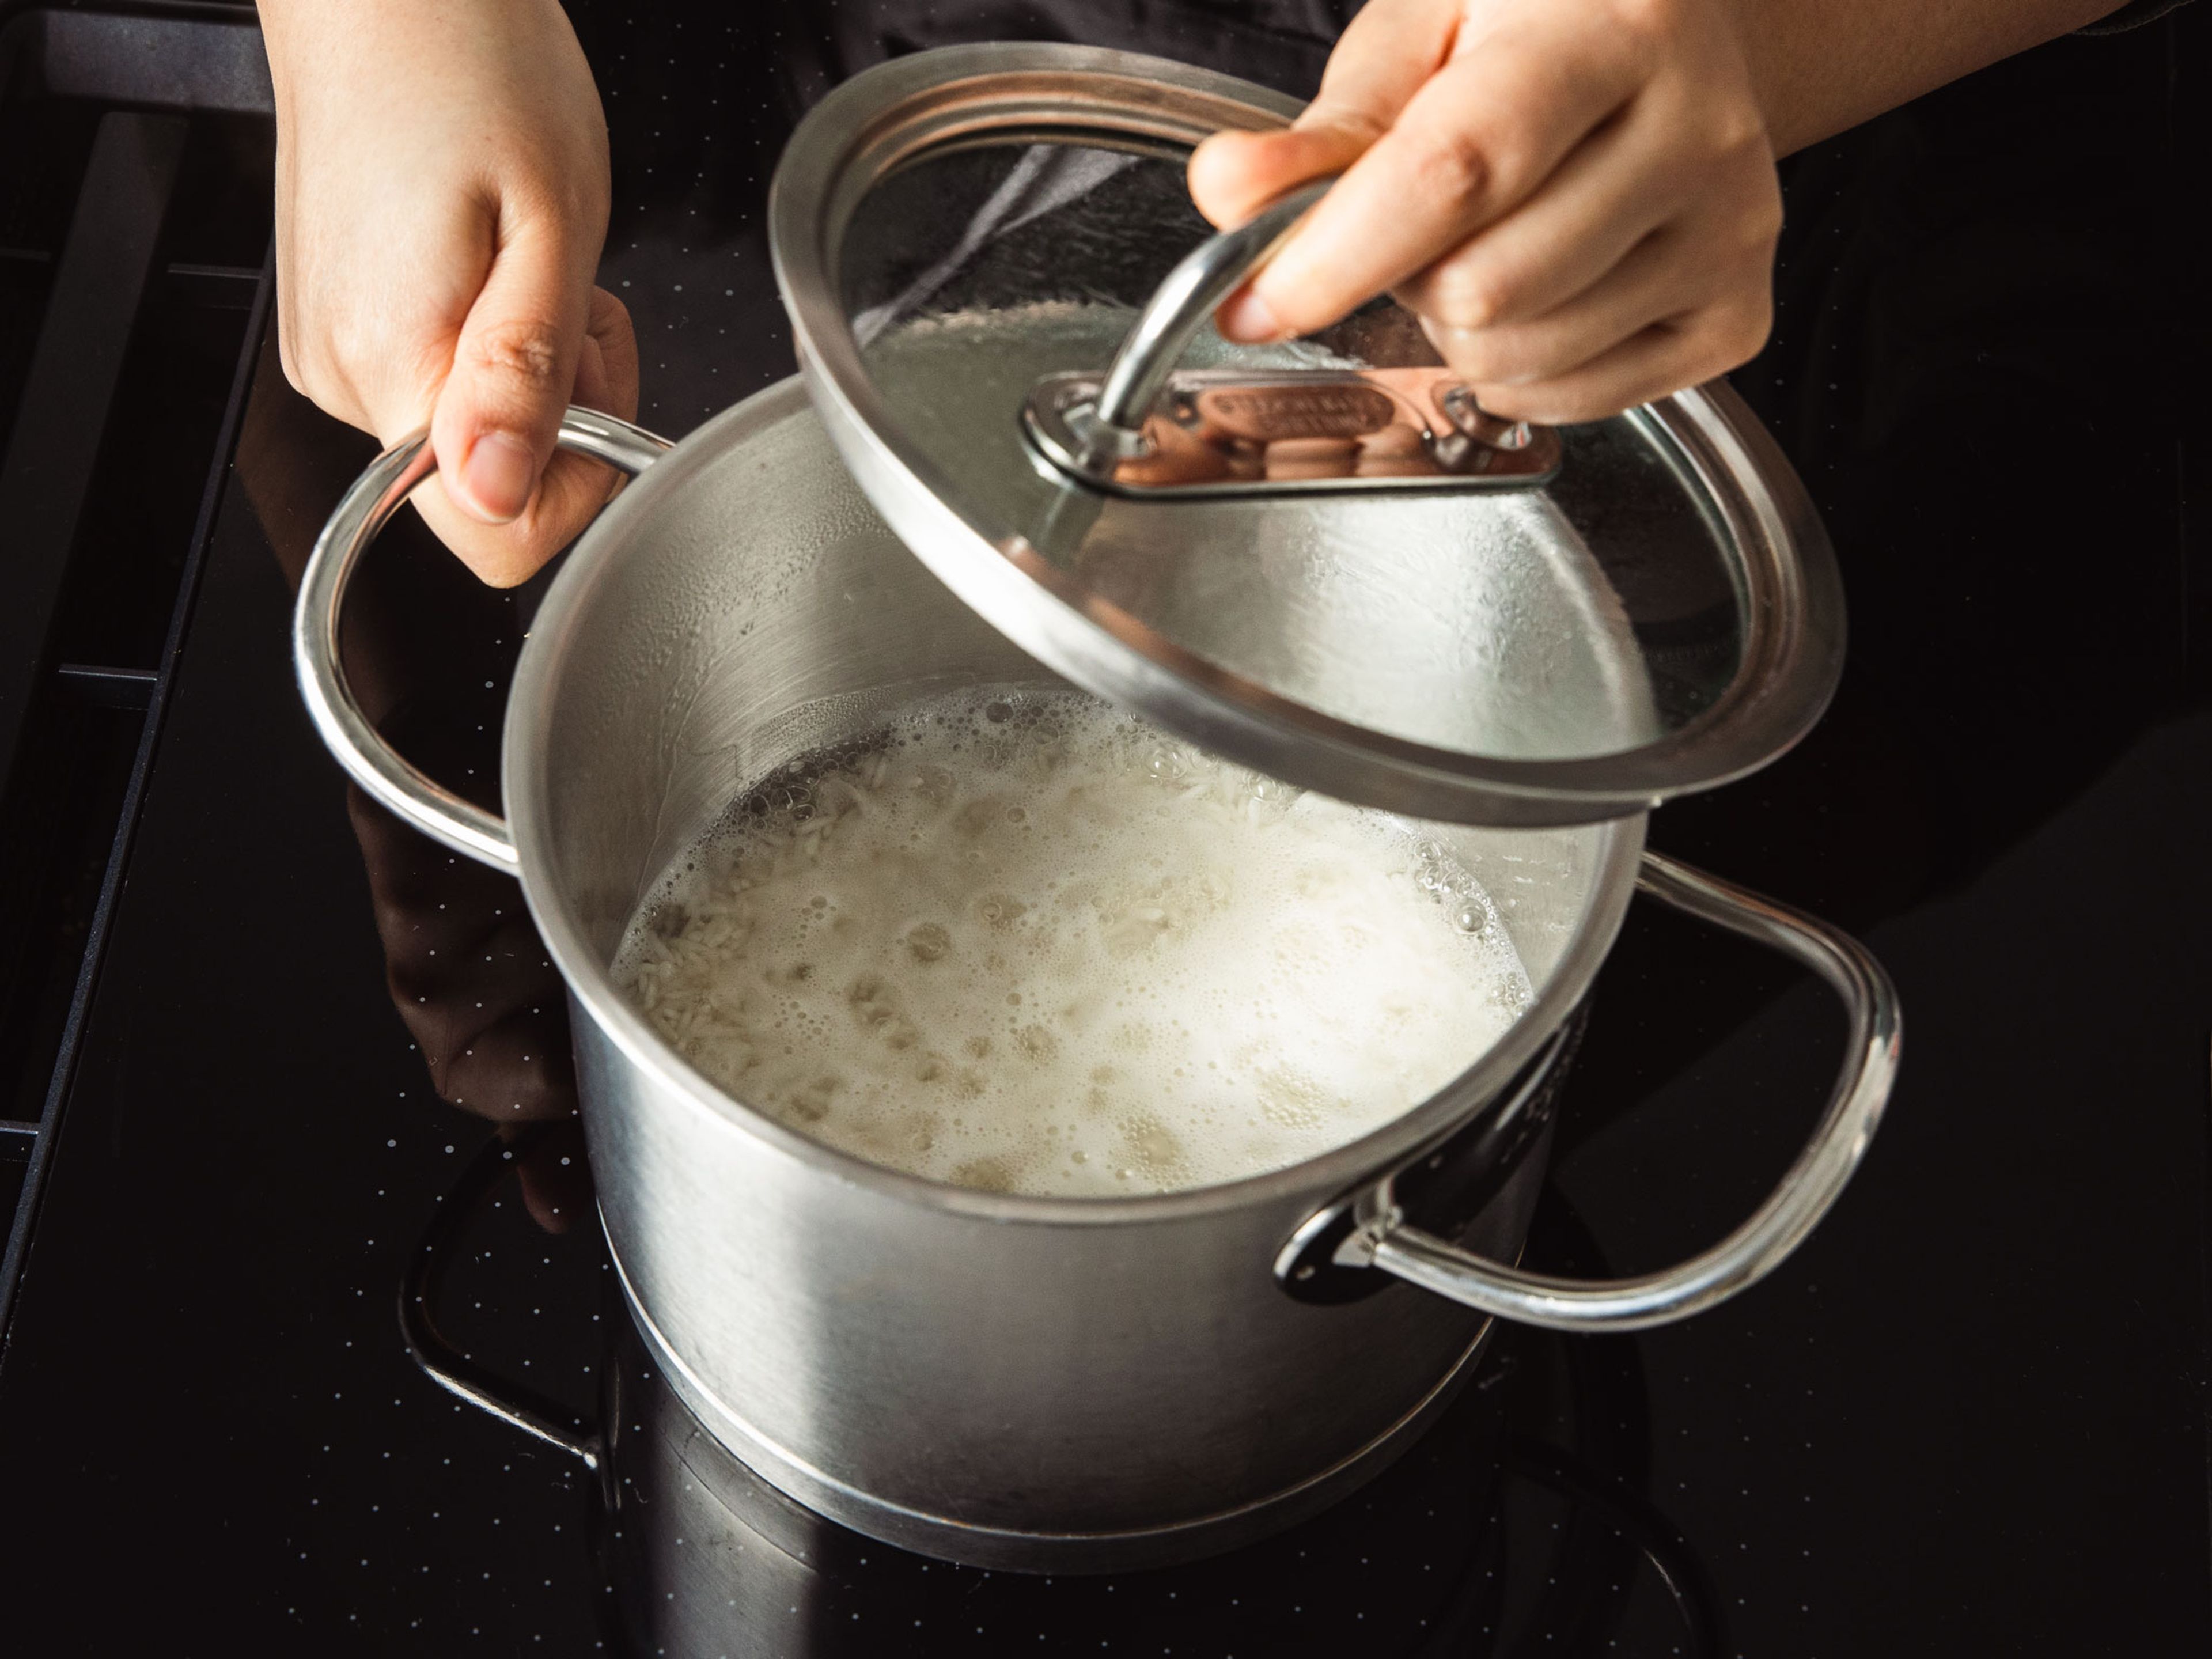 Rinse jasmine rice under running water until the water runs clear, then drain using a sieve. Add to a pot with 225 ml water, bring to a boil and then let simmer over medium-low heat for approx. 12 min. with a lid on. Then turn off the heat and let it sit on the stove.